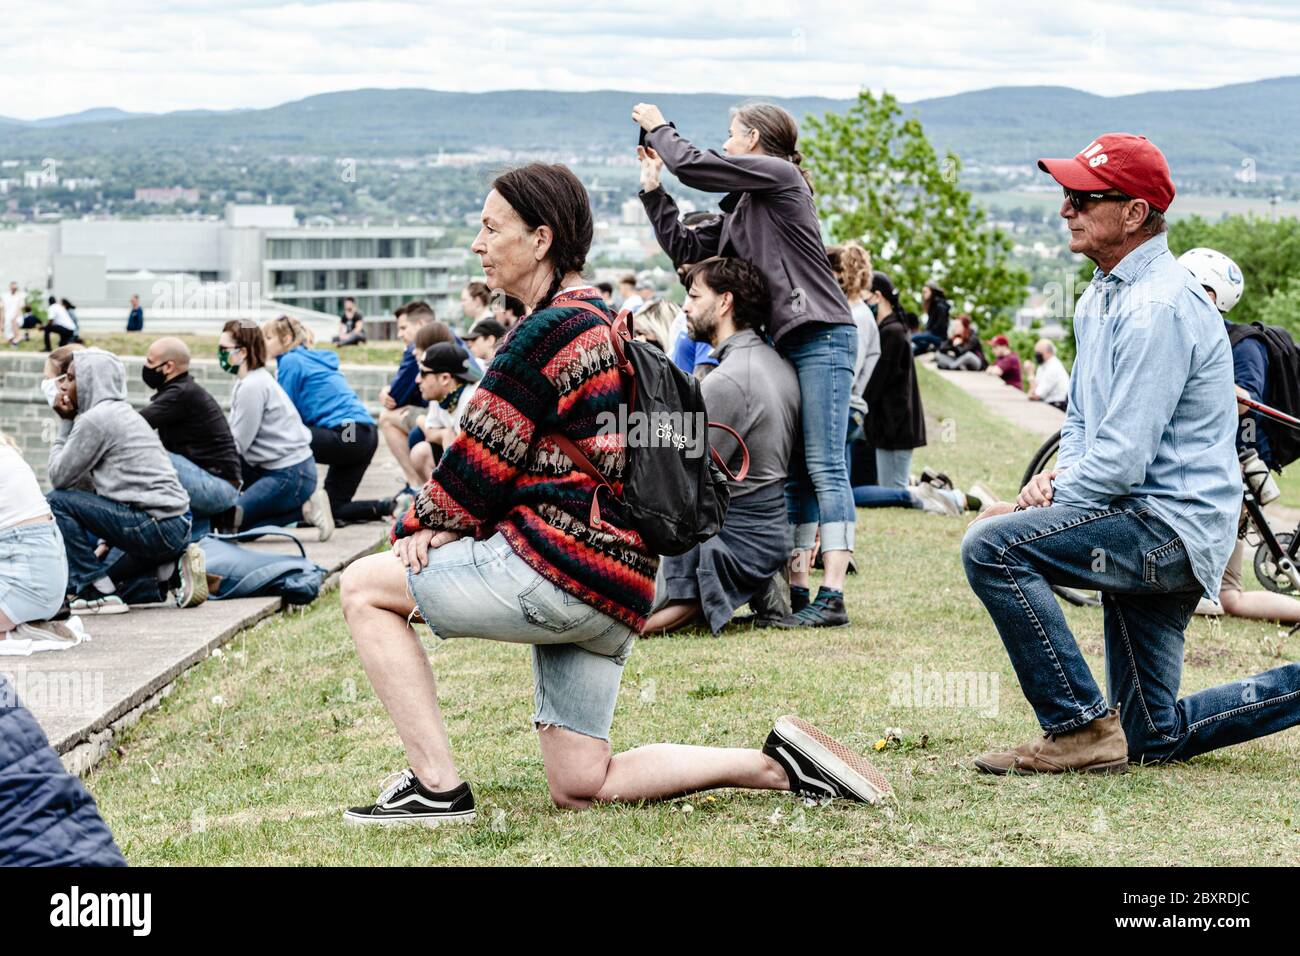 Quebec City, Canada. 7th June, 2020. some people kneeling during the 8min 46s of George Floyd memorial at the anti-racism peaceful rally of Quebec City, Credit: Francois OZAN/Alamy Live News Stock Photo